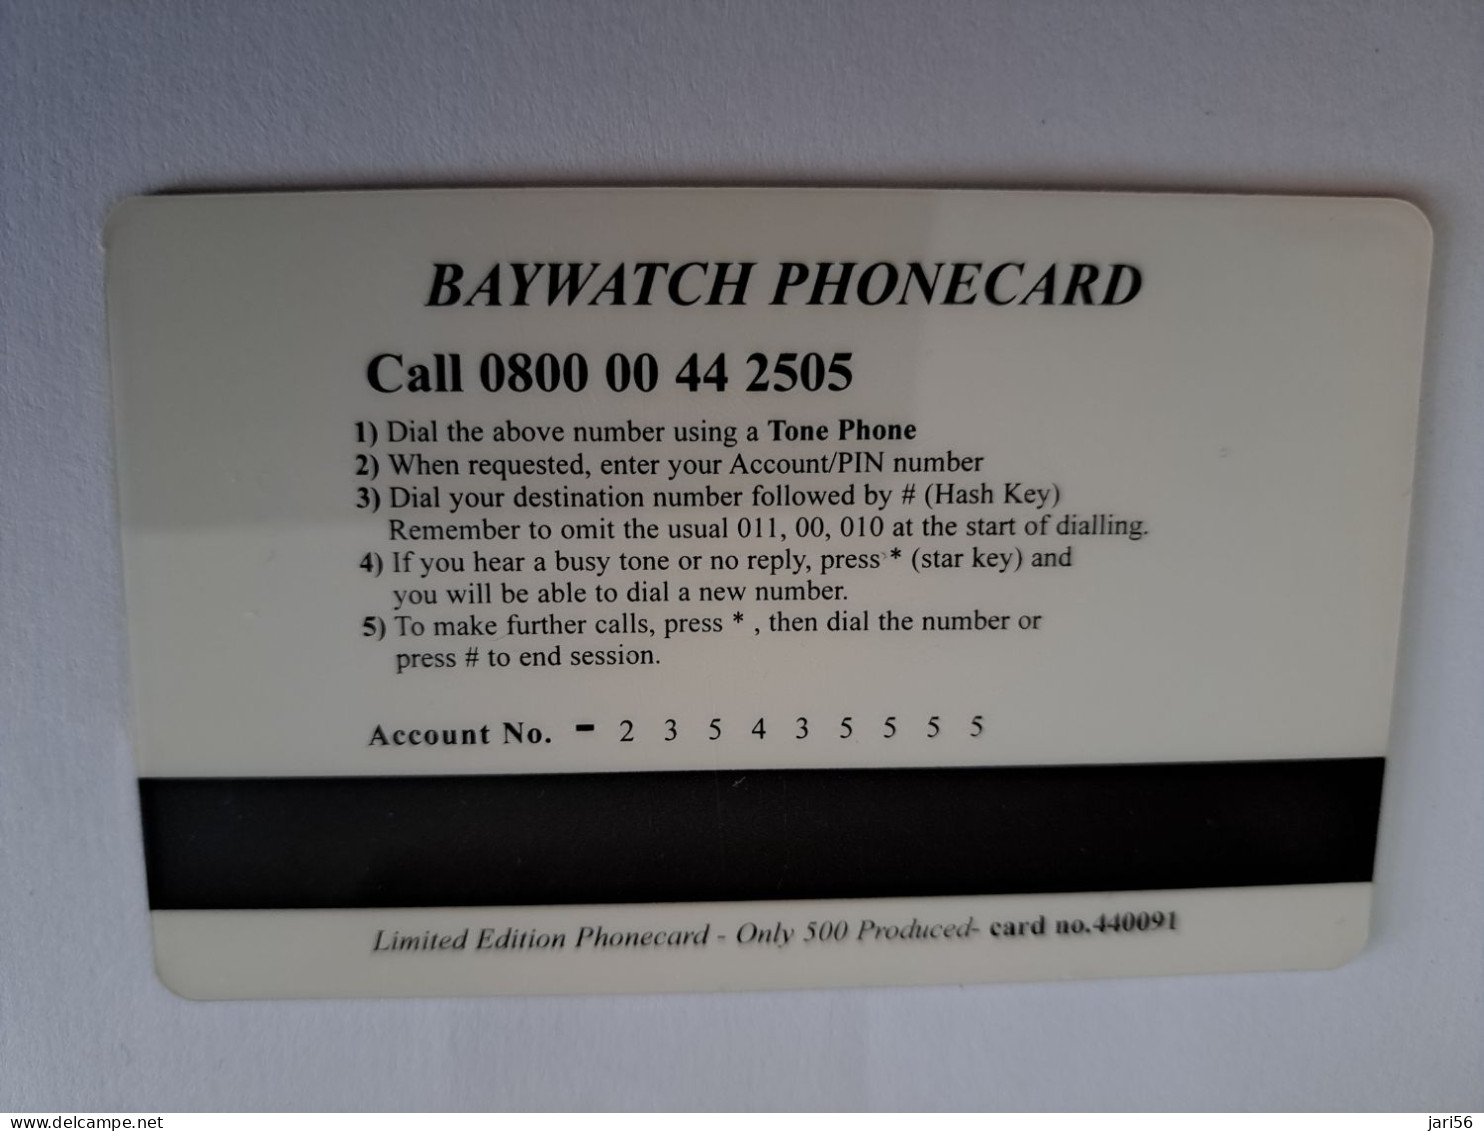 GREAT BRITAIN / 10 POUND /MAGSTRIPE  / BAYWATCH PHONECARD/ LIMITED EDITION/ ONLY 500 EX     **15682** - Verzamelingen